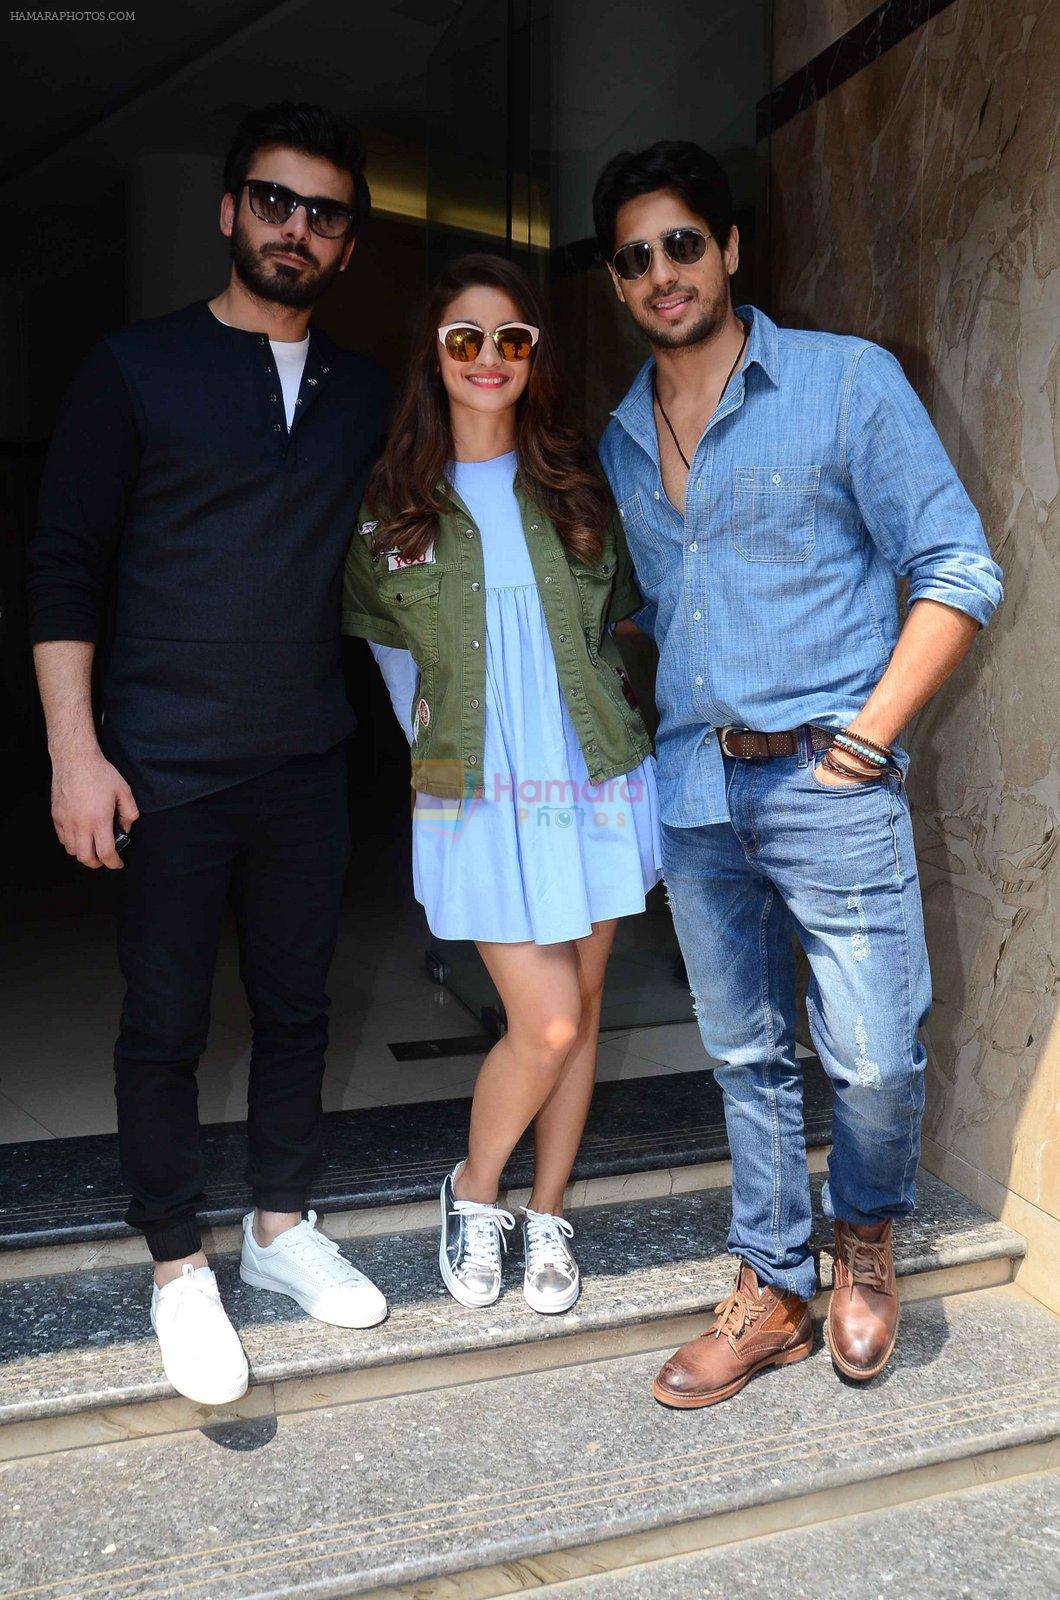 Alia BHatt, Sidharth Malhotra and Fawad Khan snapped outisde radio station on 3rd March 2016